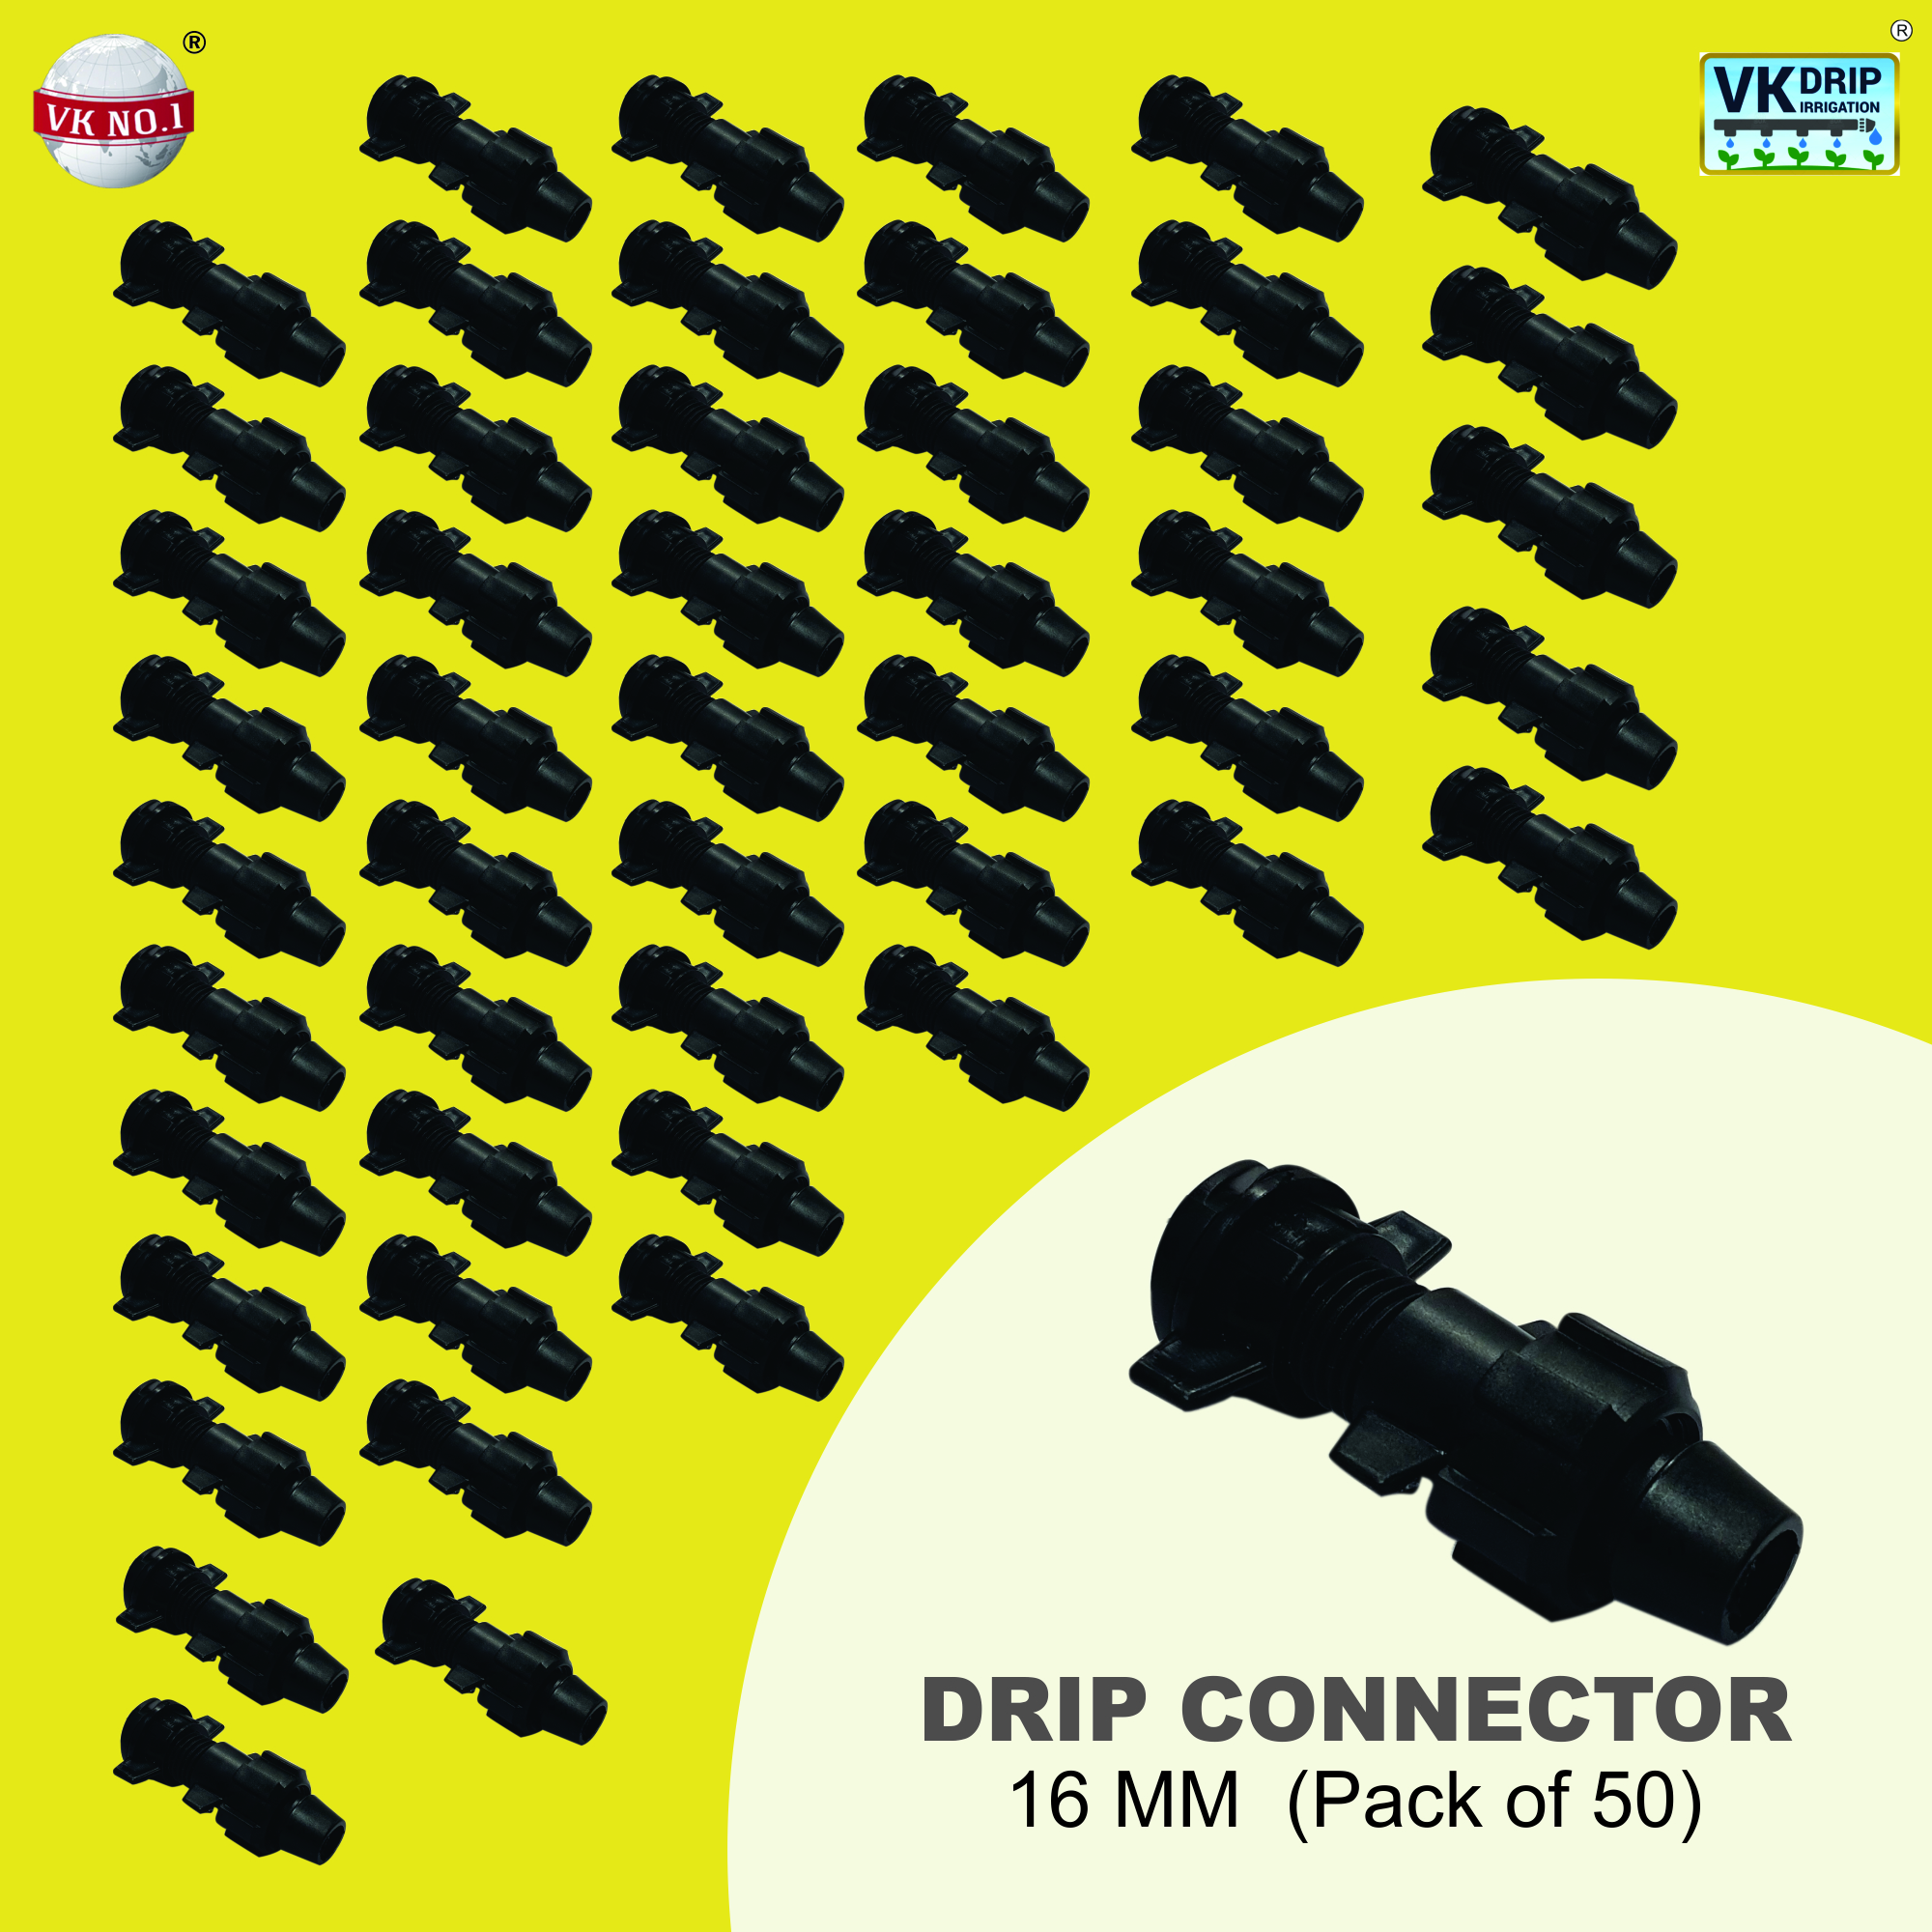 Drip Connector 16 MM (Pack of 50) Drip Irrigation Kit